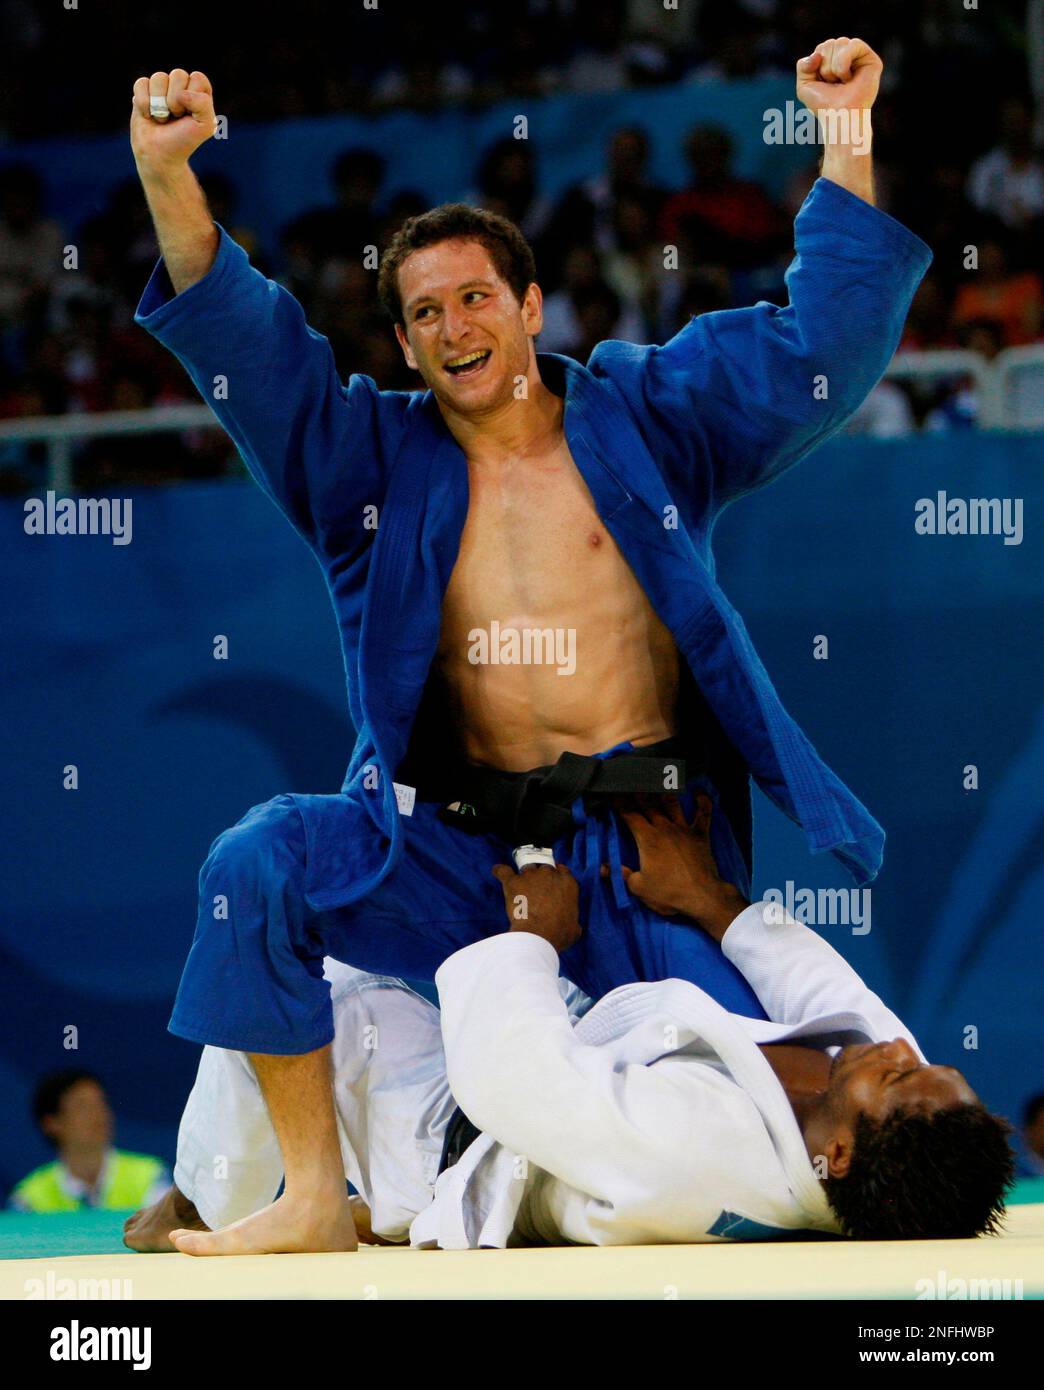 Tiago Camilo of Brazil celebrates his bronze win over the Netherlands Guillaume Elmont at the judo half middleweight division finals at the Beijing 2008 Olympics in Beijing, Tuesday, Aug. 12, 2008. (AP Photo/Charles Dharapak) Stock Photo